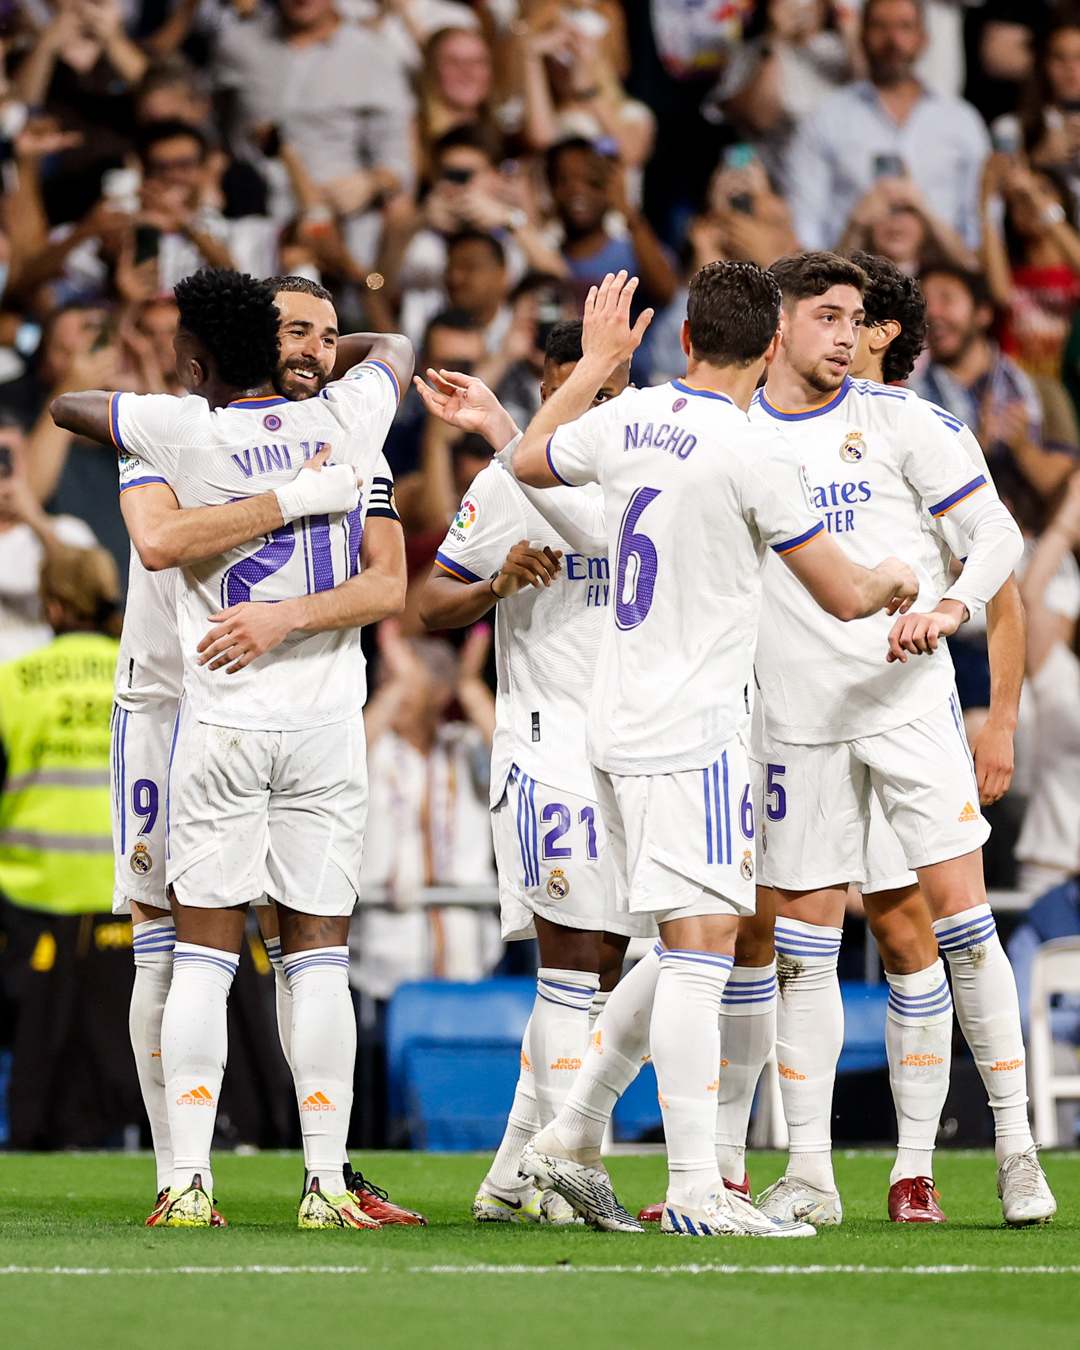 La Liga: Real Madrid score six goals as Levante are RELEGATED from La Liga, Vinicius Junior bags first hat-trick for Los Blancos, Watch Real Madrid beat Levante HIGHLIGHTS